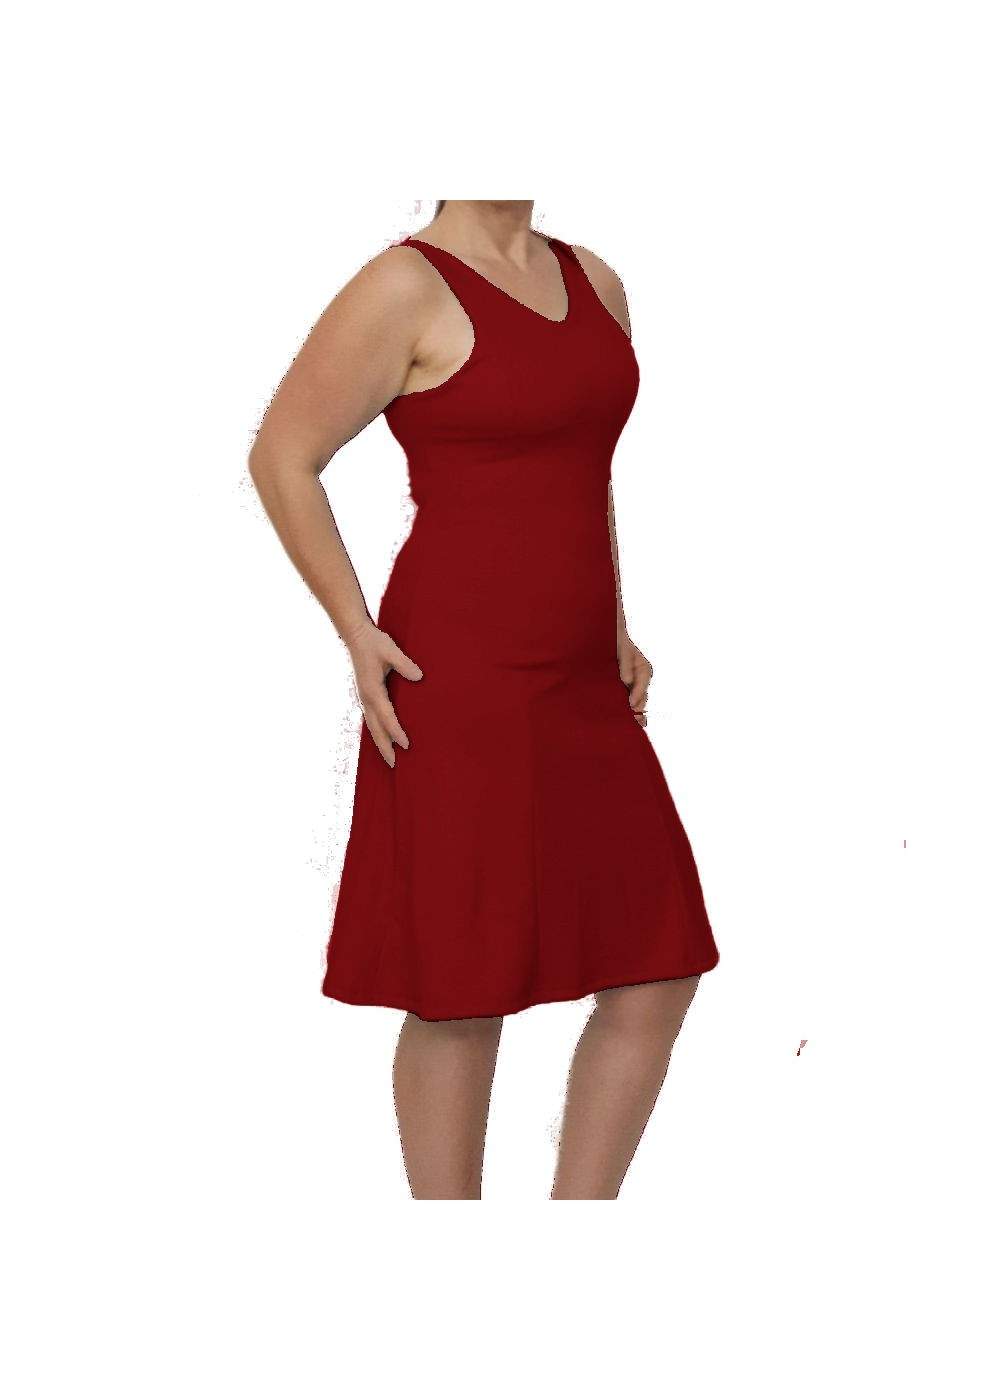 Save 15 percent on Red strap dress with V-neck - 